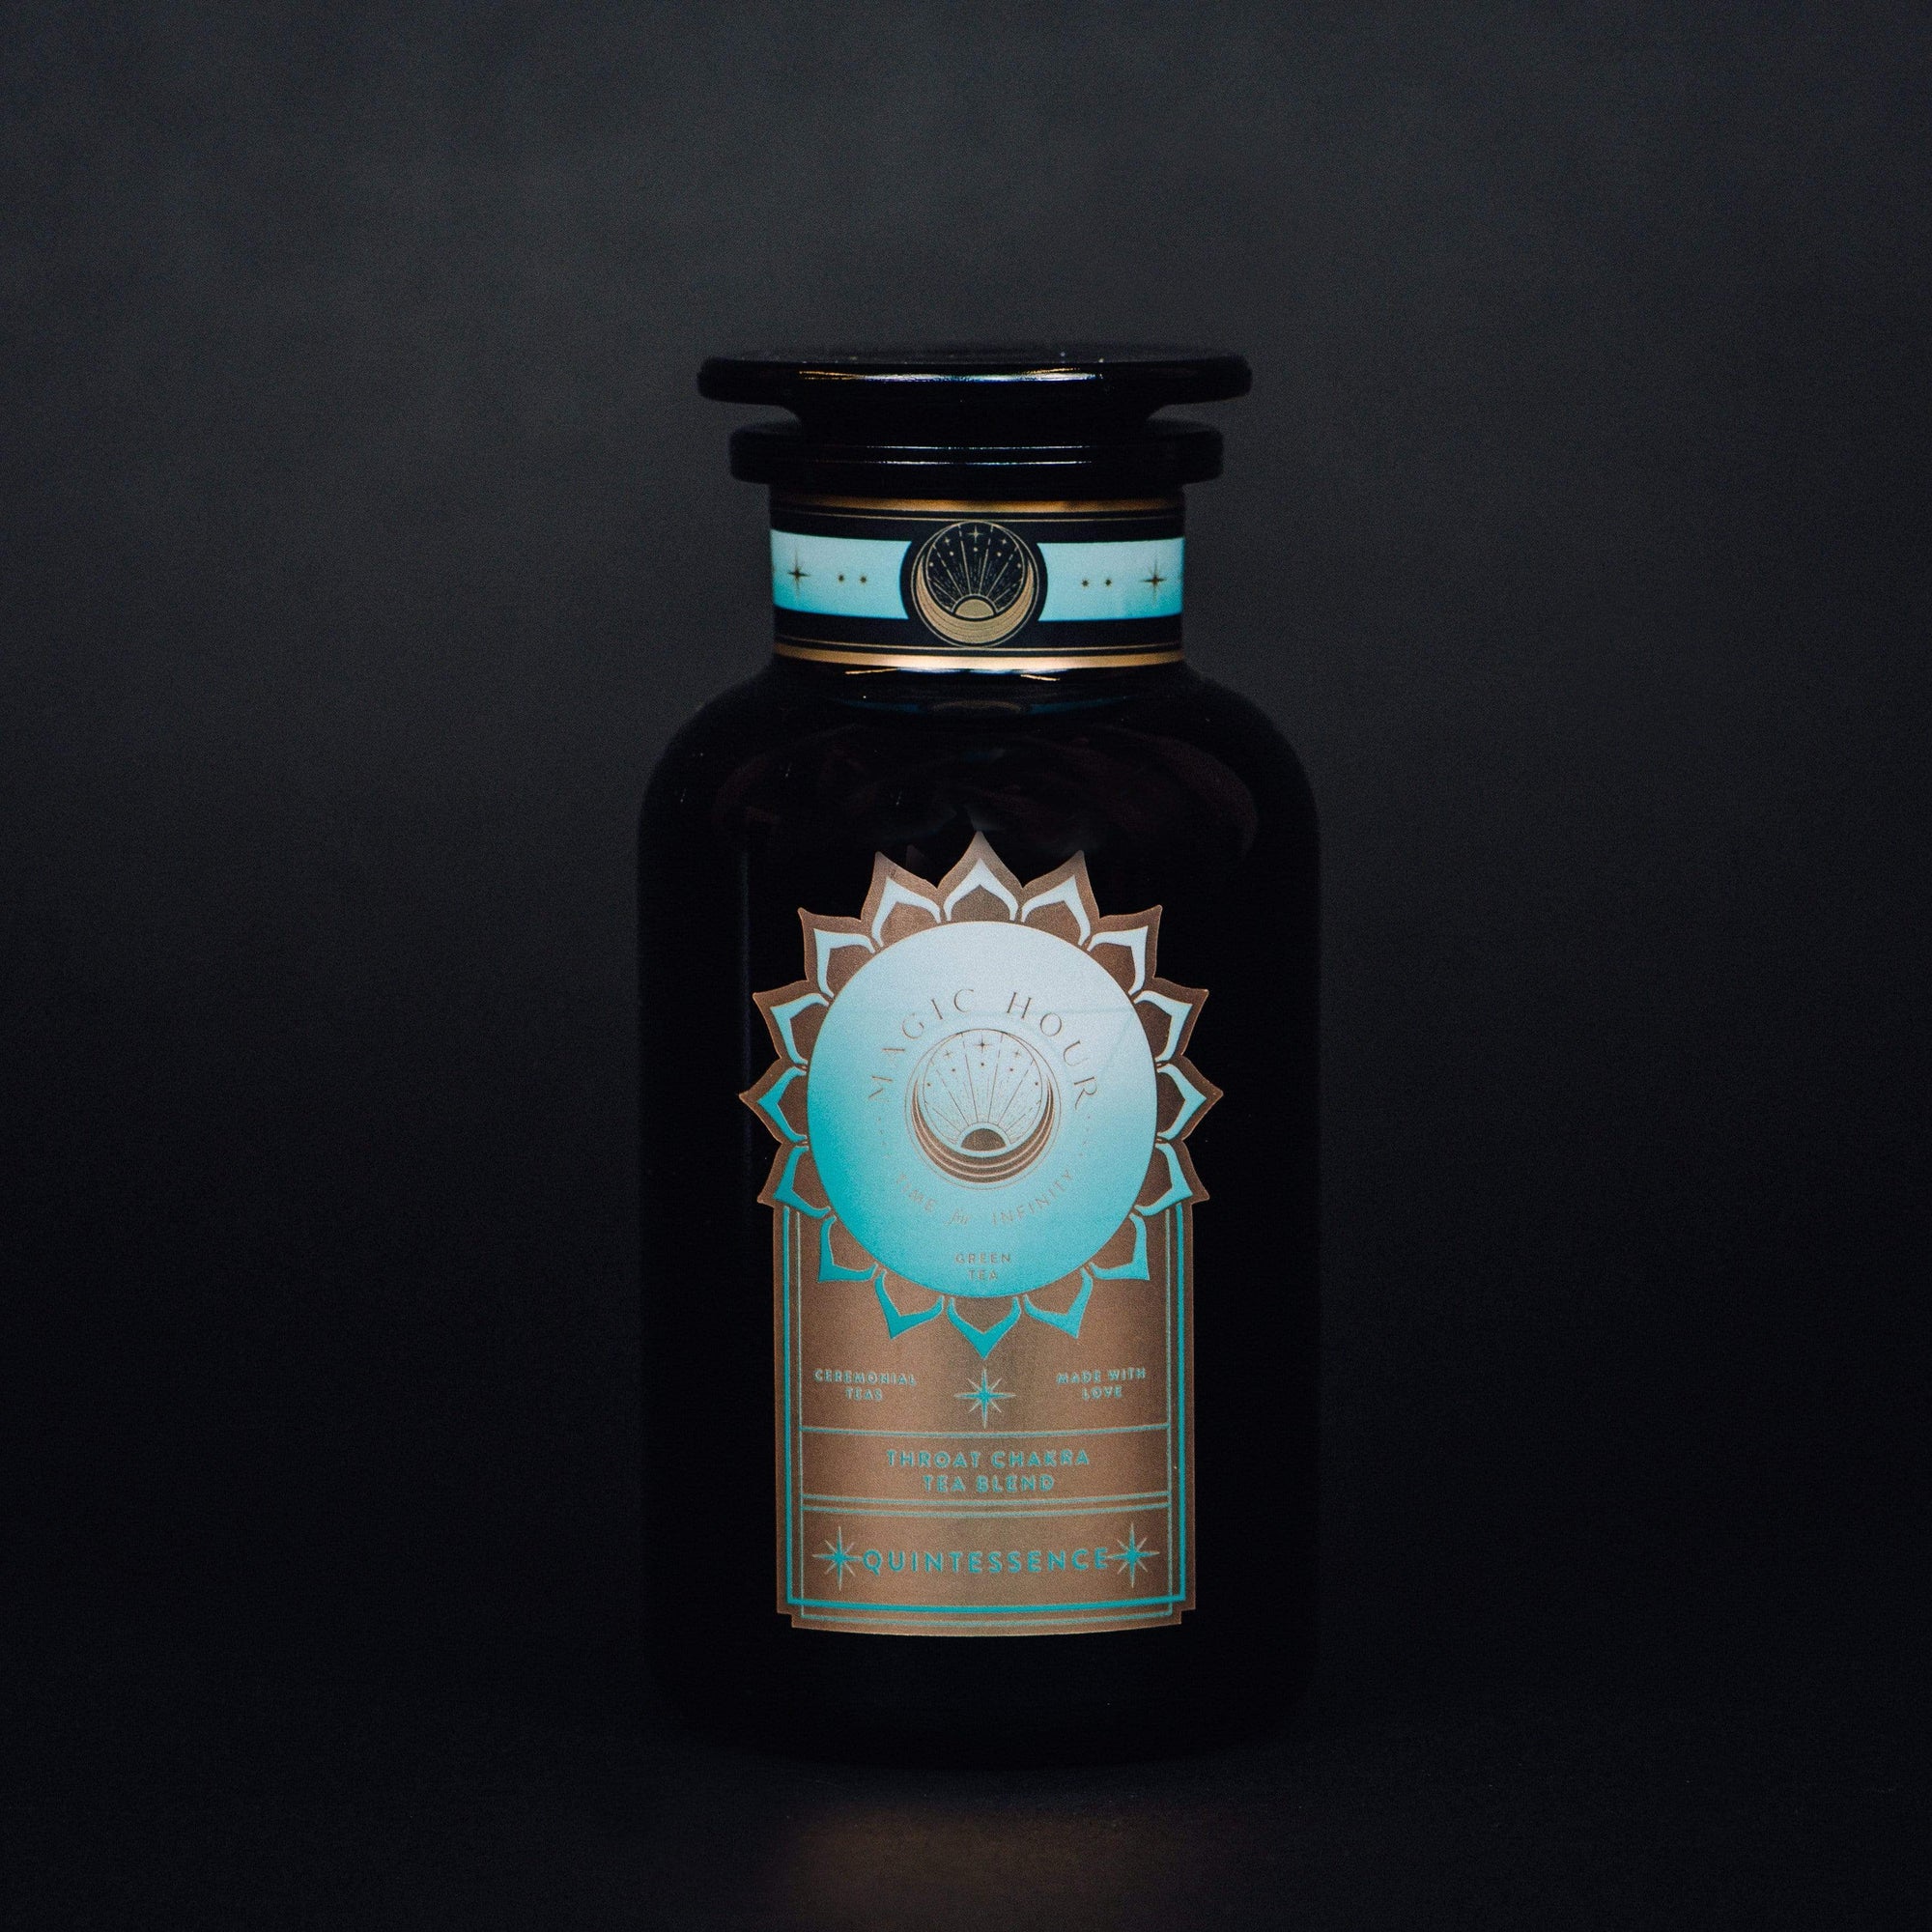 A bottle with a logo on it, perfect for storing your favorite Magic Hour Quintessence™ Tea for Opening & Healing the Throat Chakra.